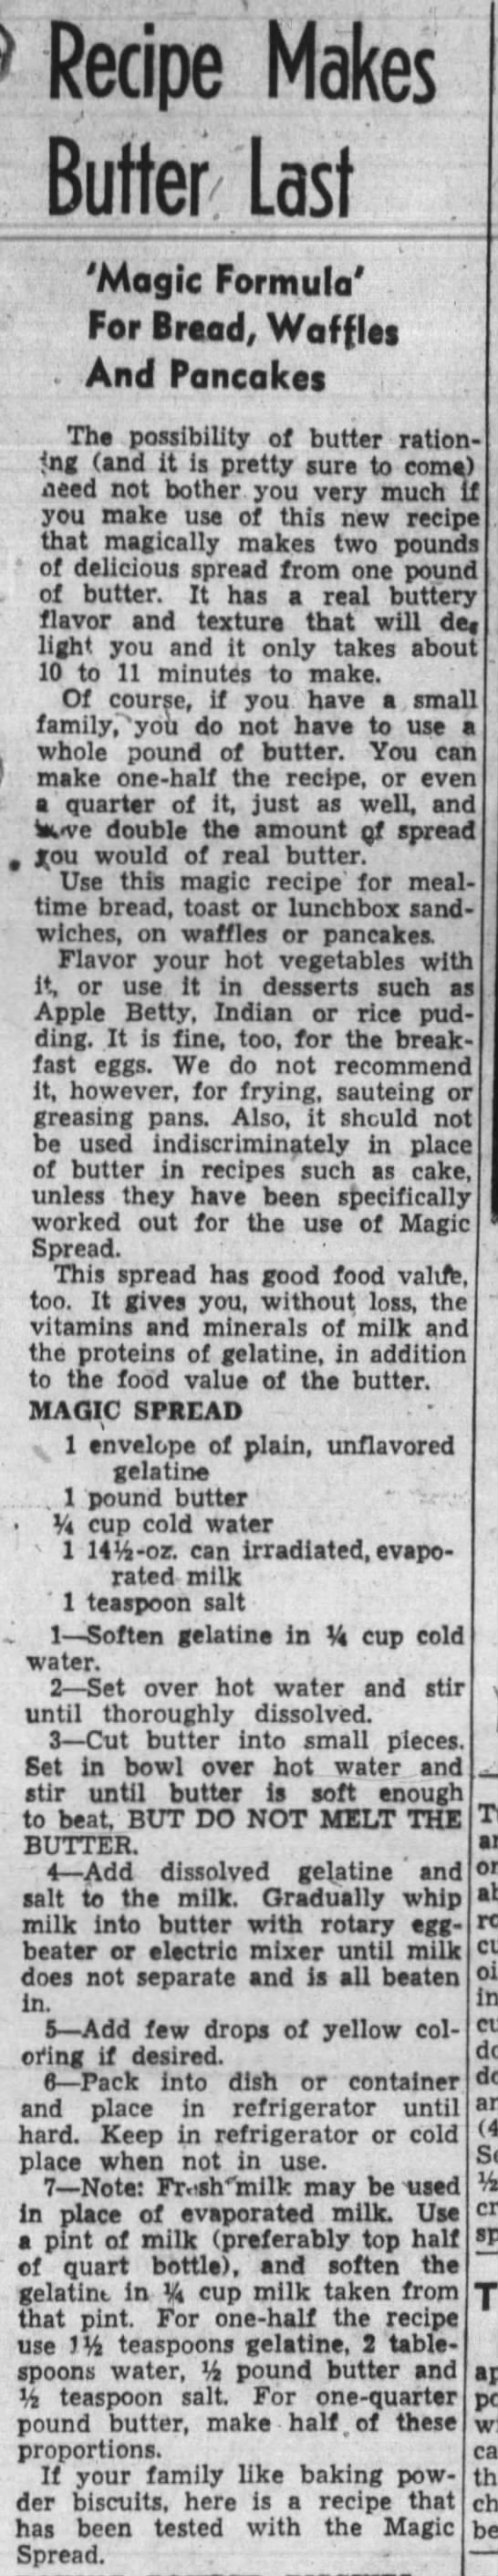 Recipe for "magic spread" that makes butter go father (1943) - 